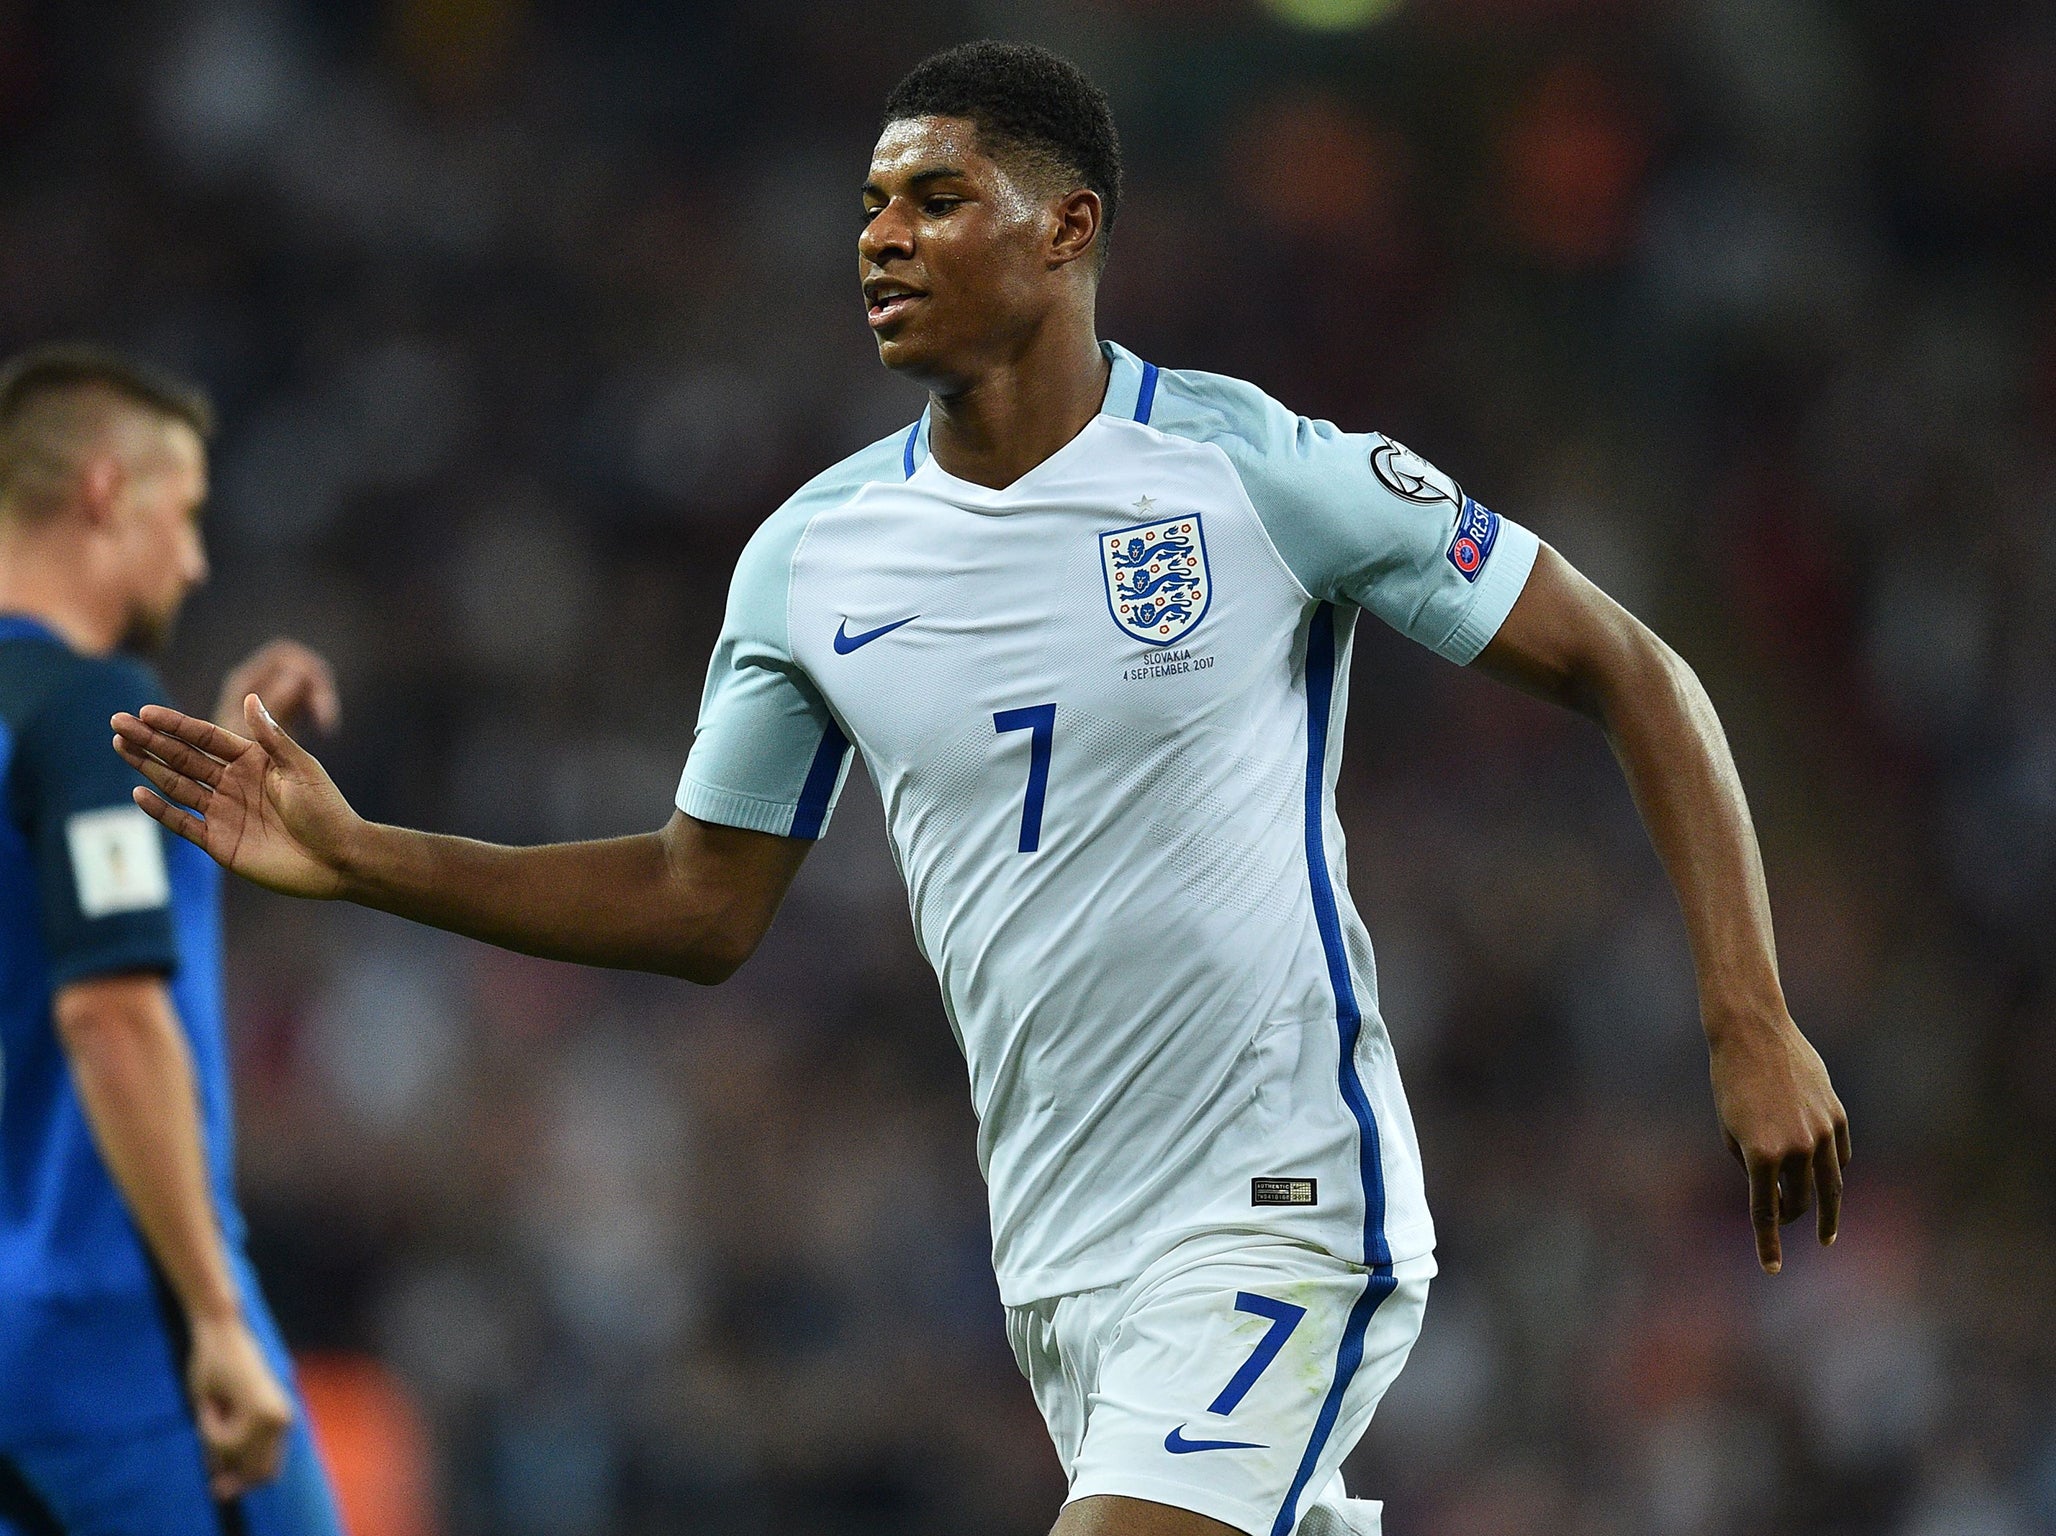 Marcus Rashford is impressing on both the domestic and international stages